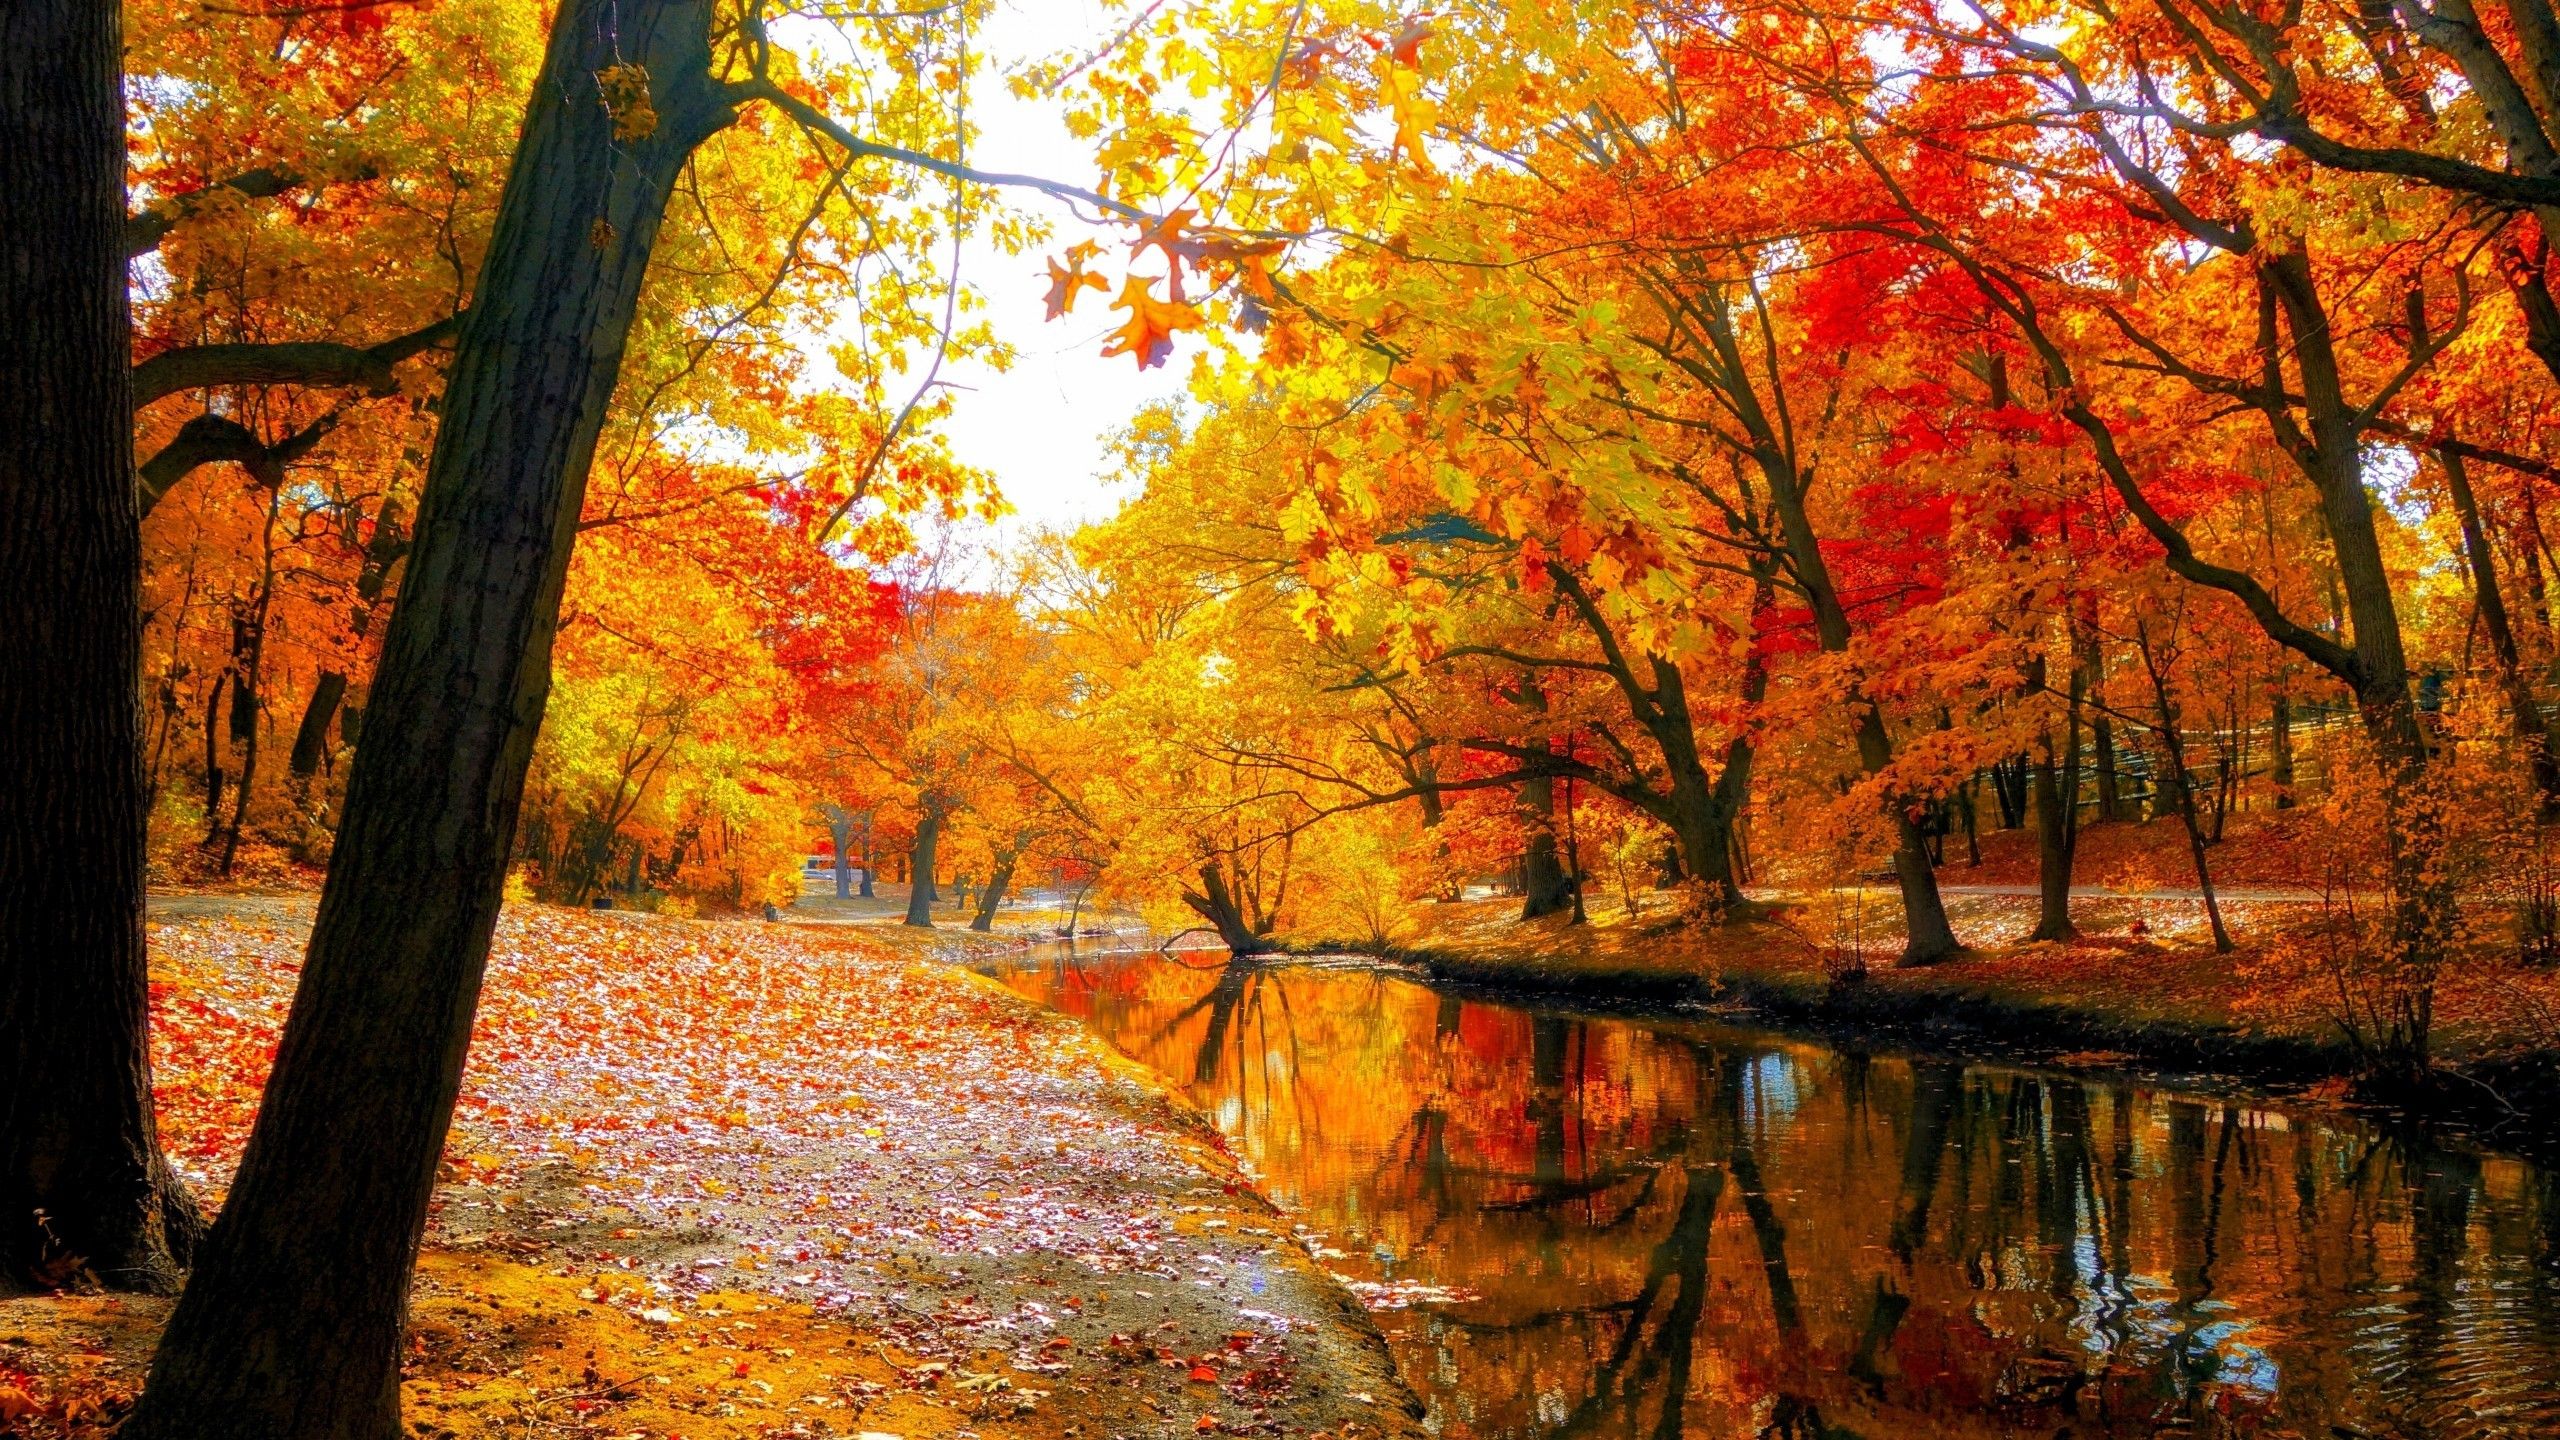 Download 2560x1440 Autumn, Mini River, Leaves, Tree Wallpaper for iMac 27 inch